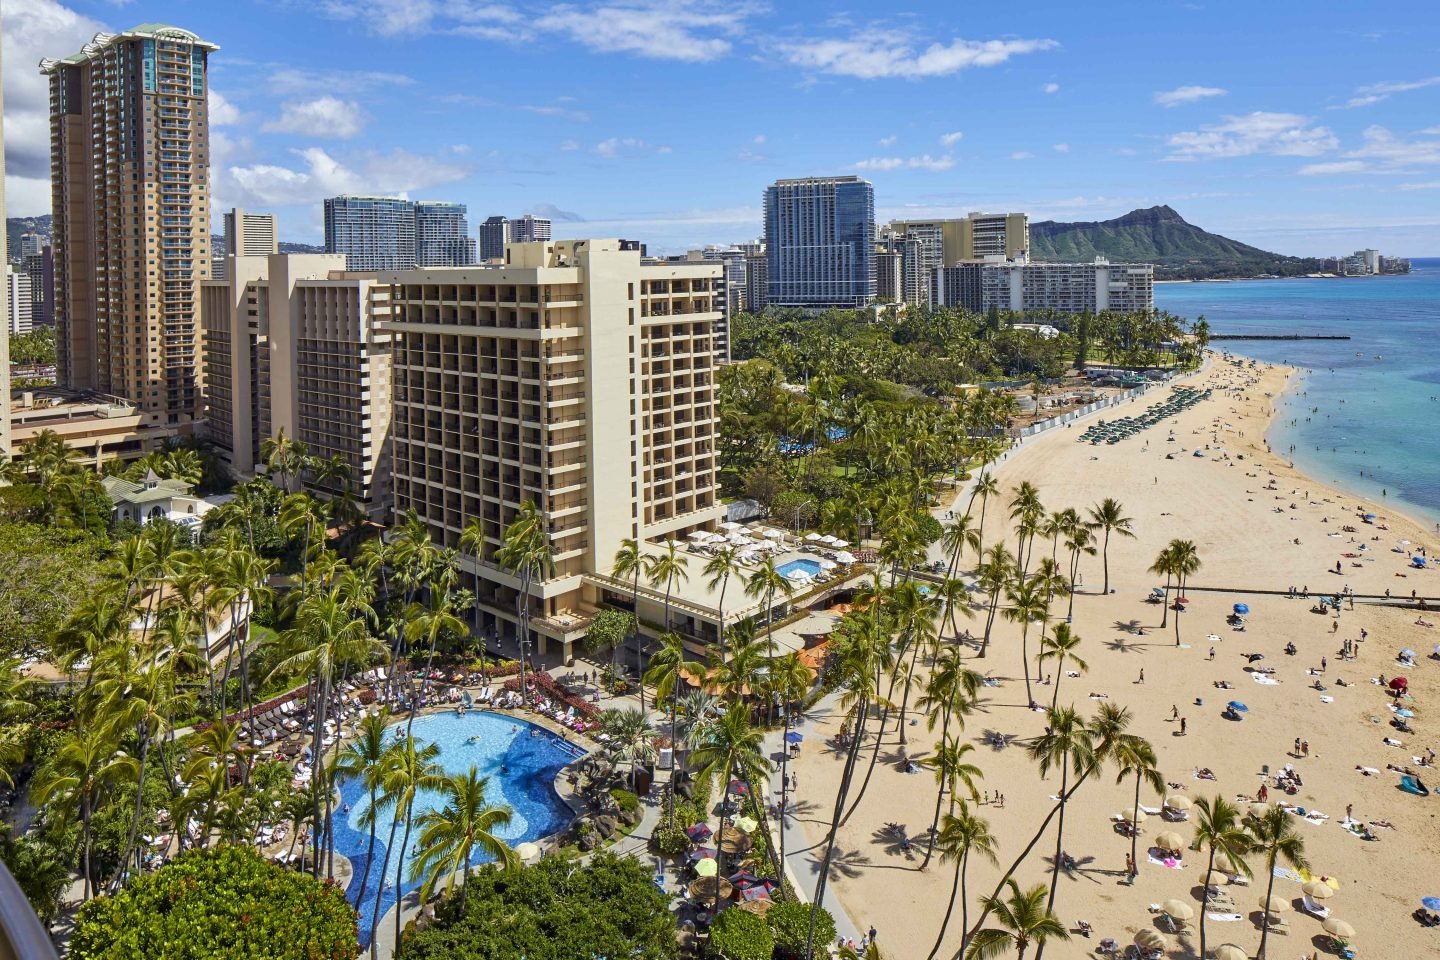 what does it cost to visit hawaii